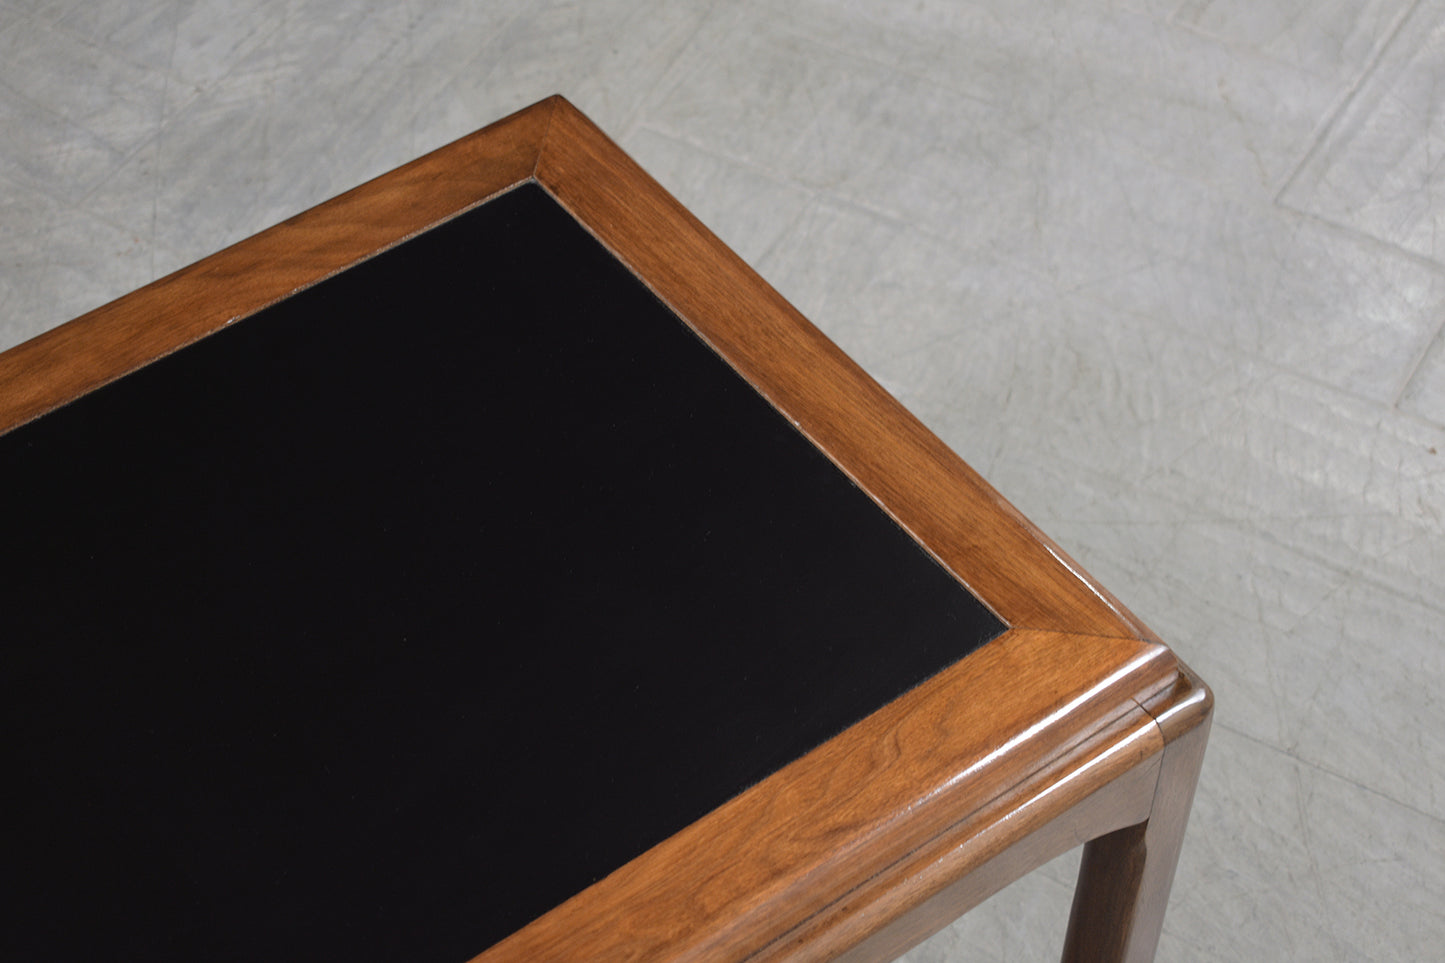 1960s Restored Mid-Century Modern Walnut Side Table with Black-Laminated Center